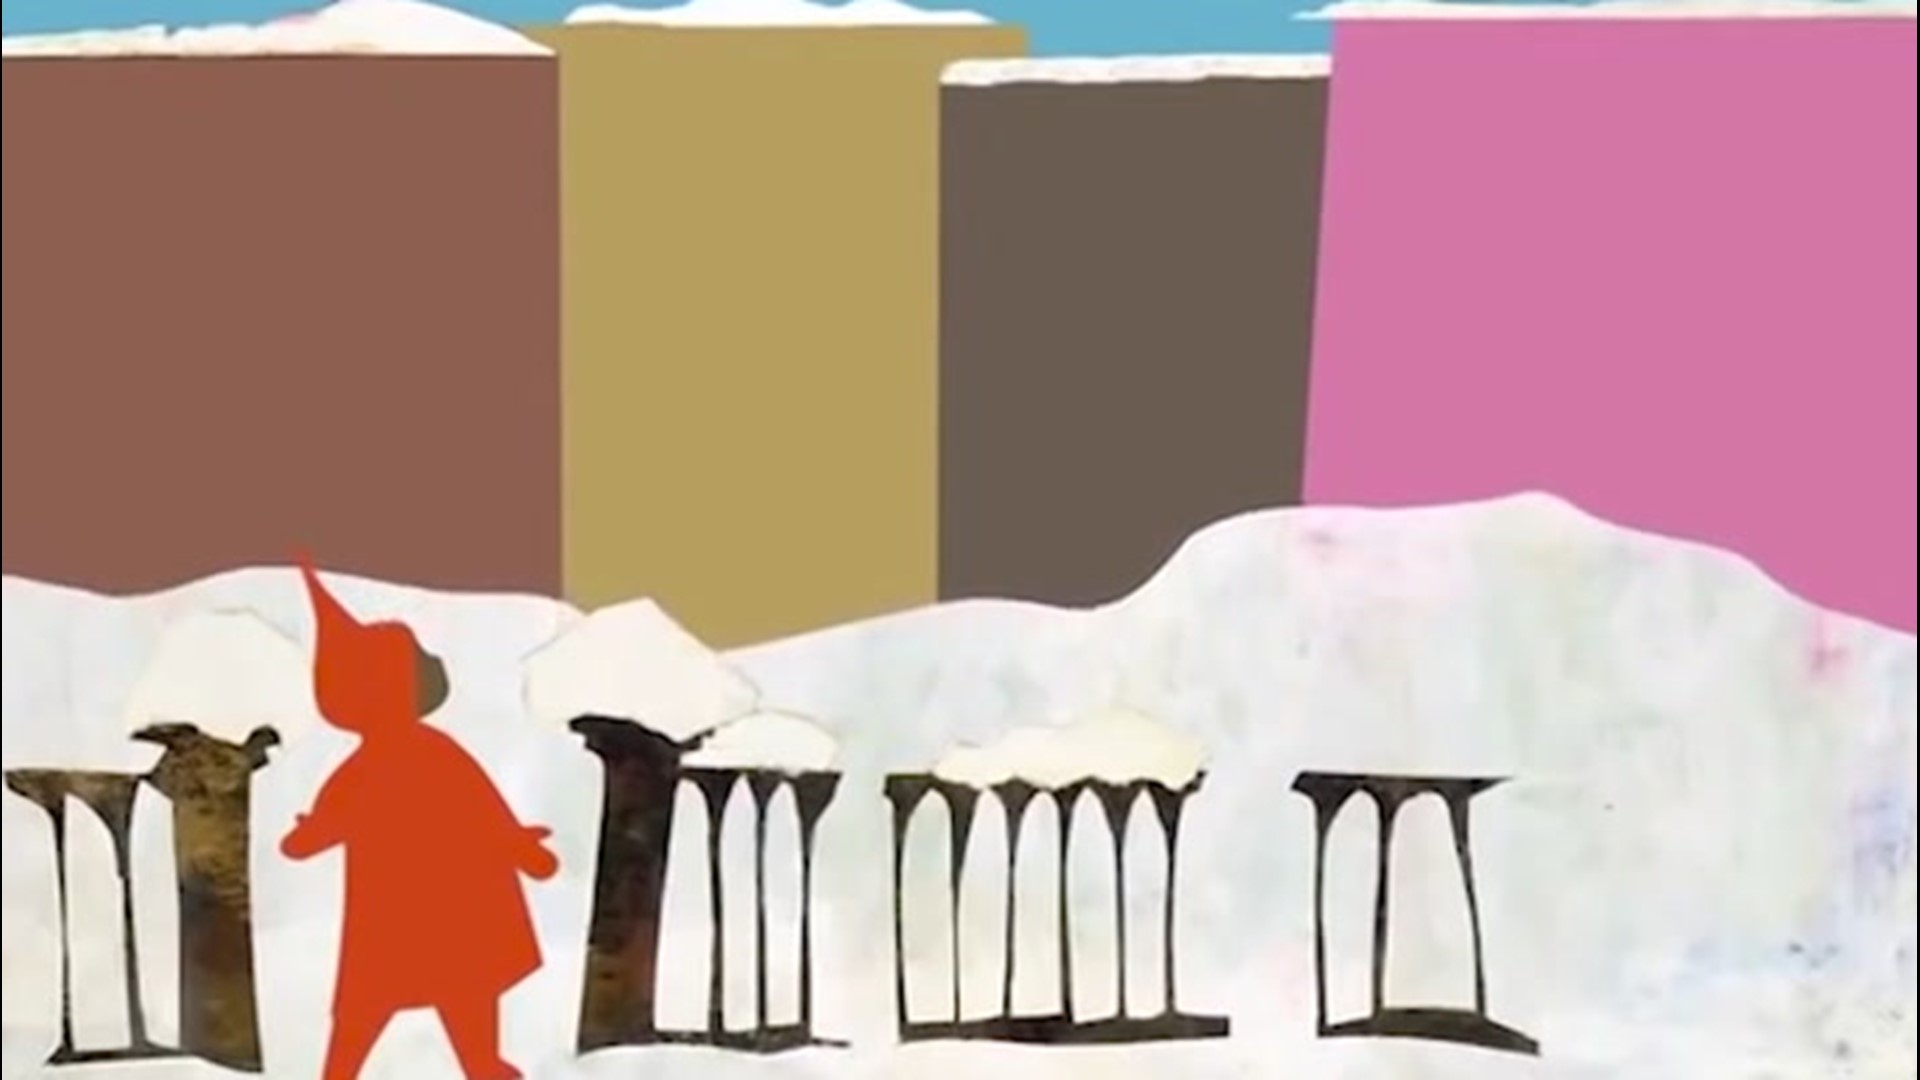 'The Snowy Day' by Ezra Jack Keats is an incredibly famous children's story. Dexter Henry was in New York City to understand why it's such an important book.